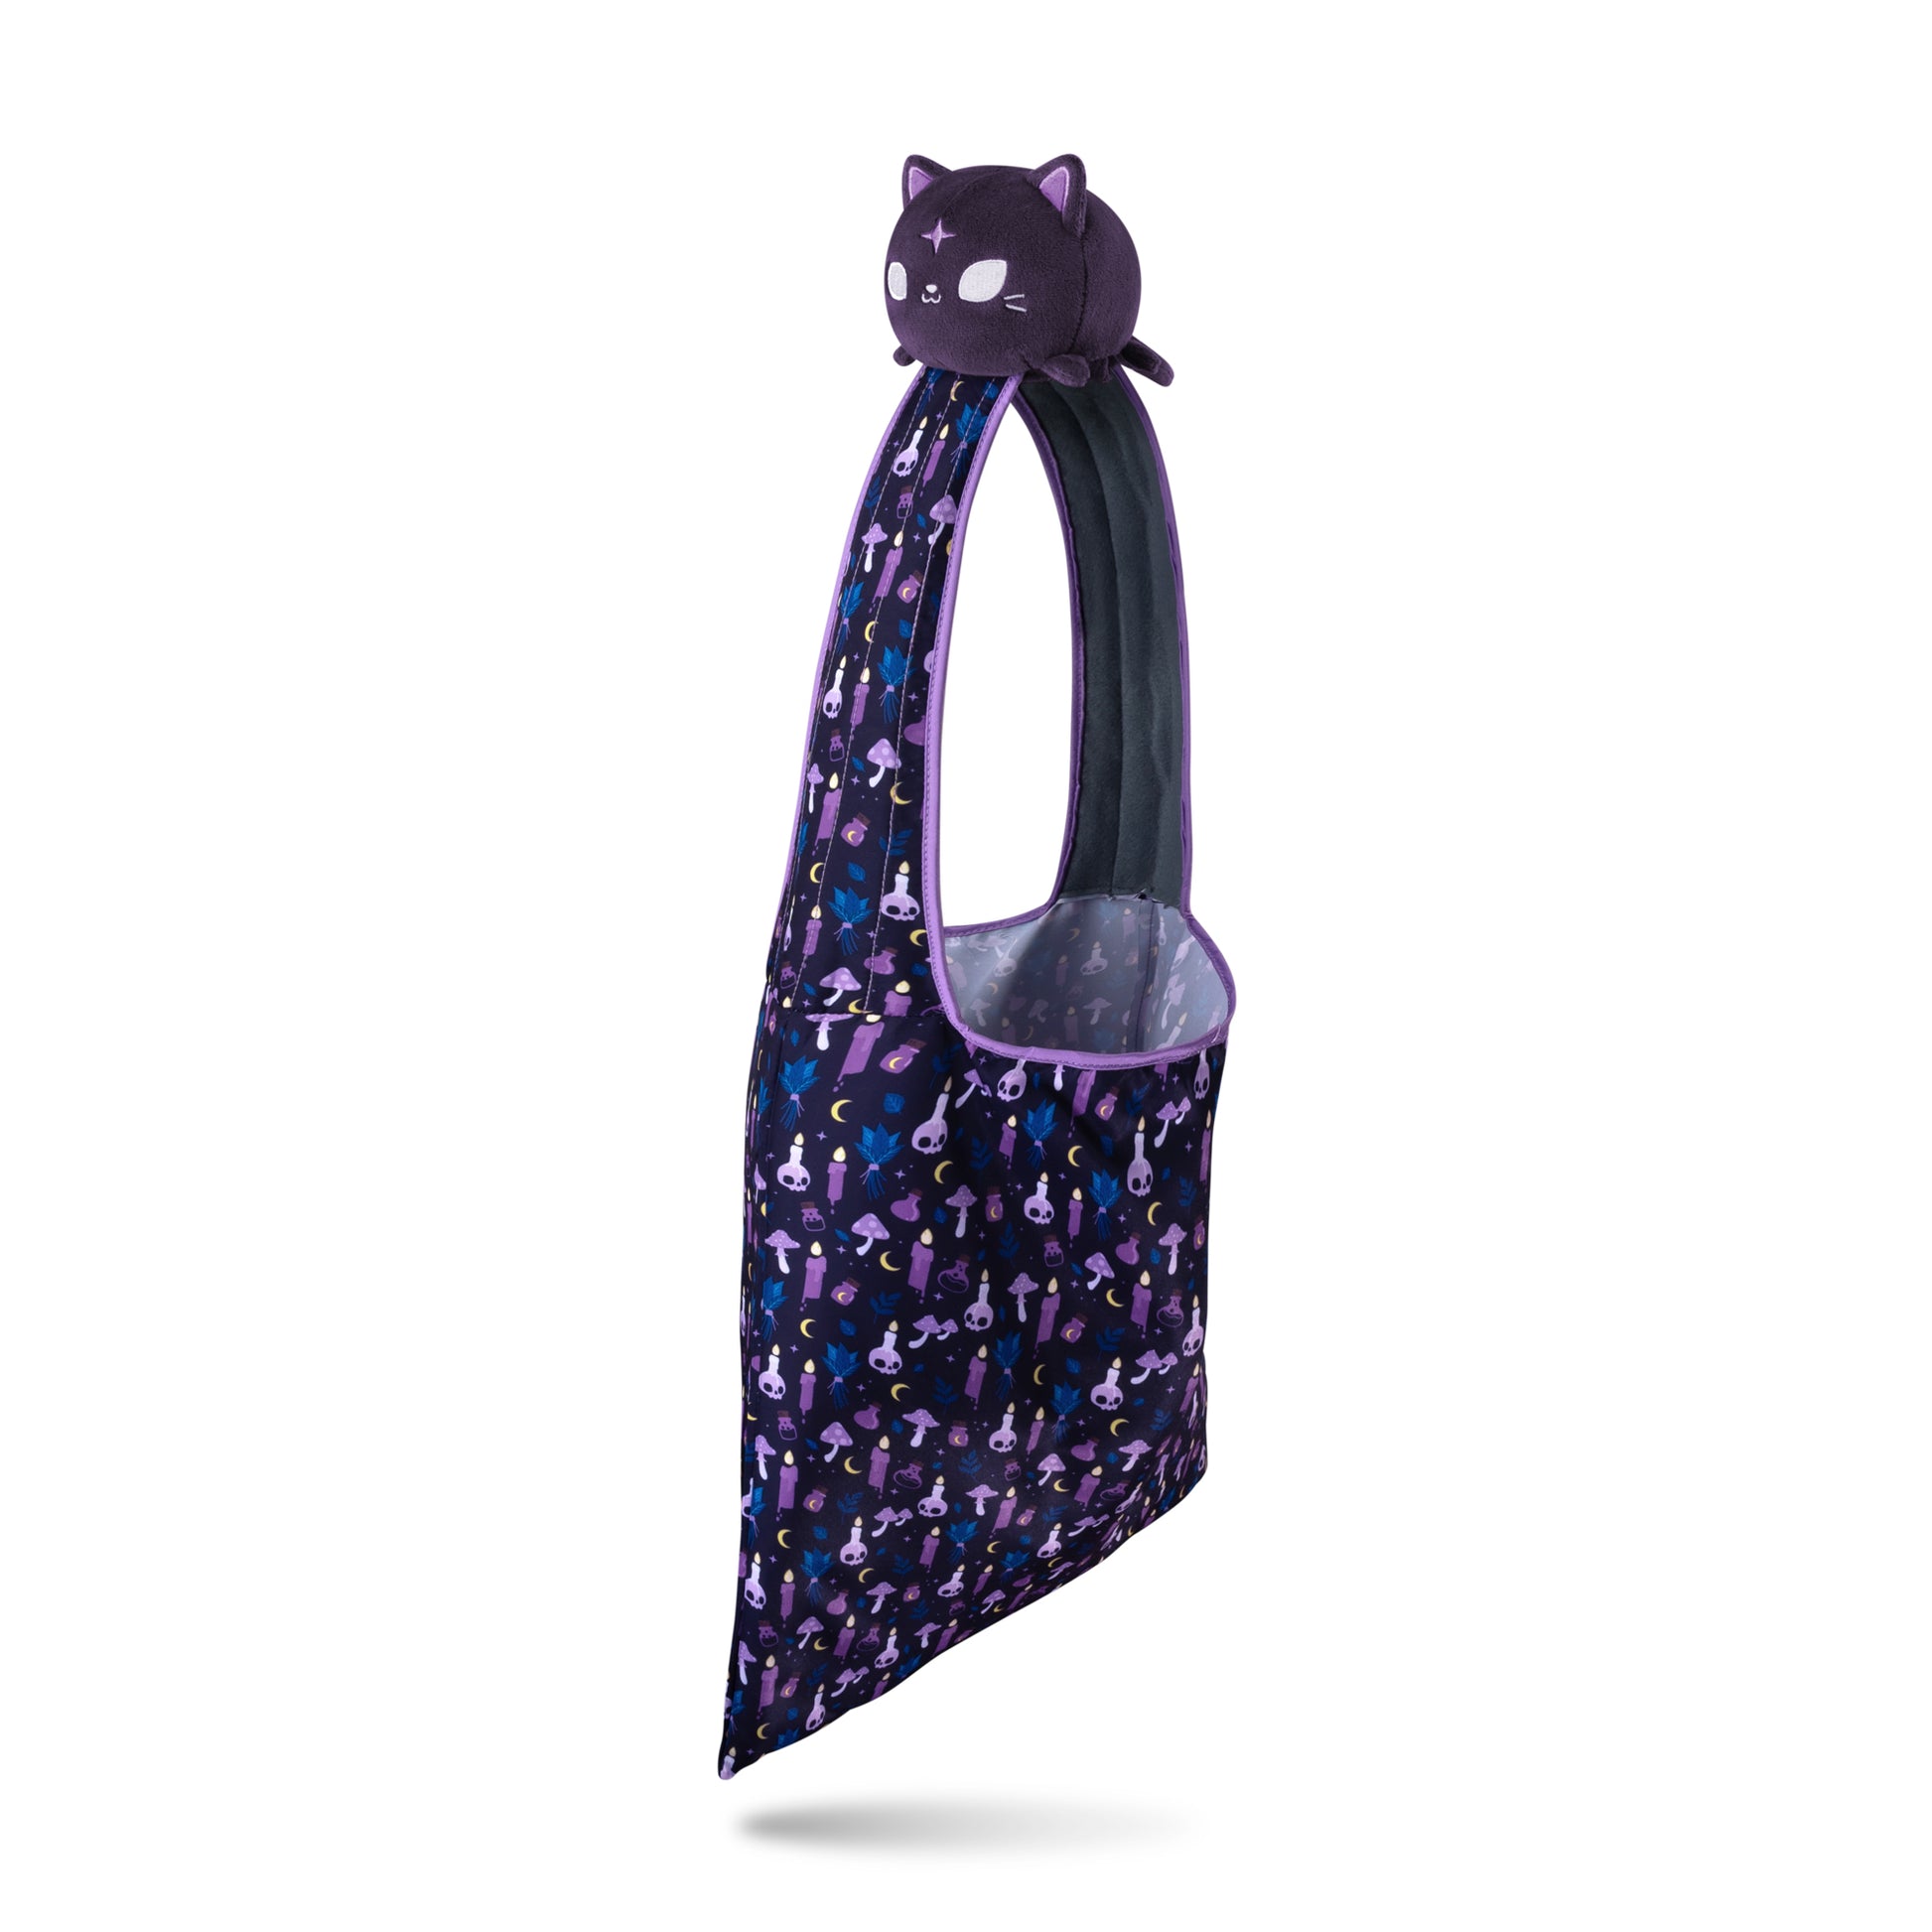 A Plushiverse Witchy Whiskers Cat Plushie Tote Bag by TeeTurtle.